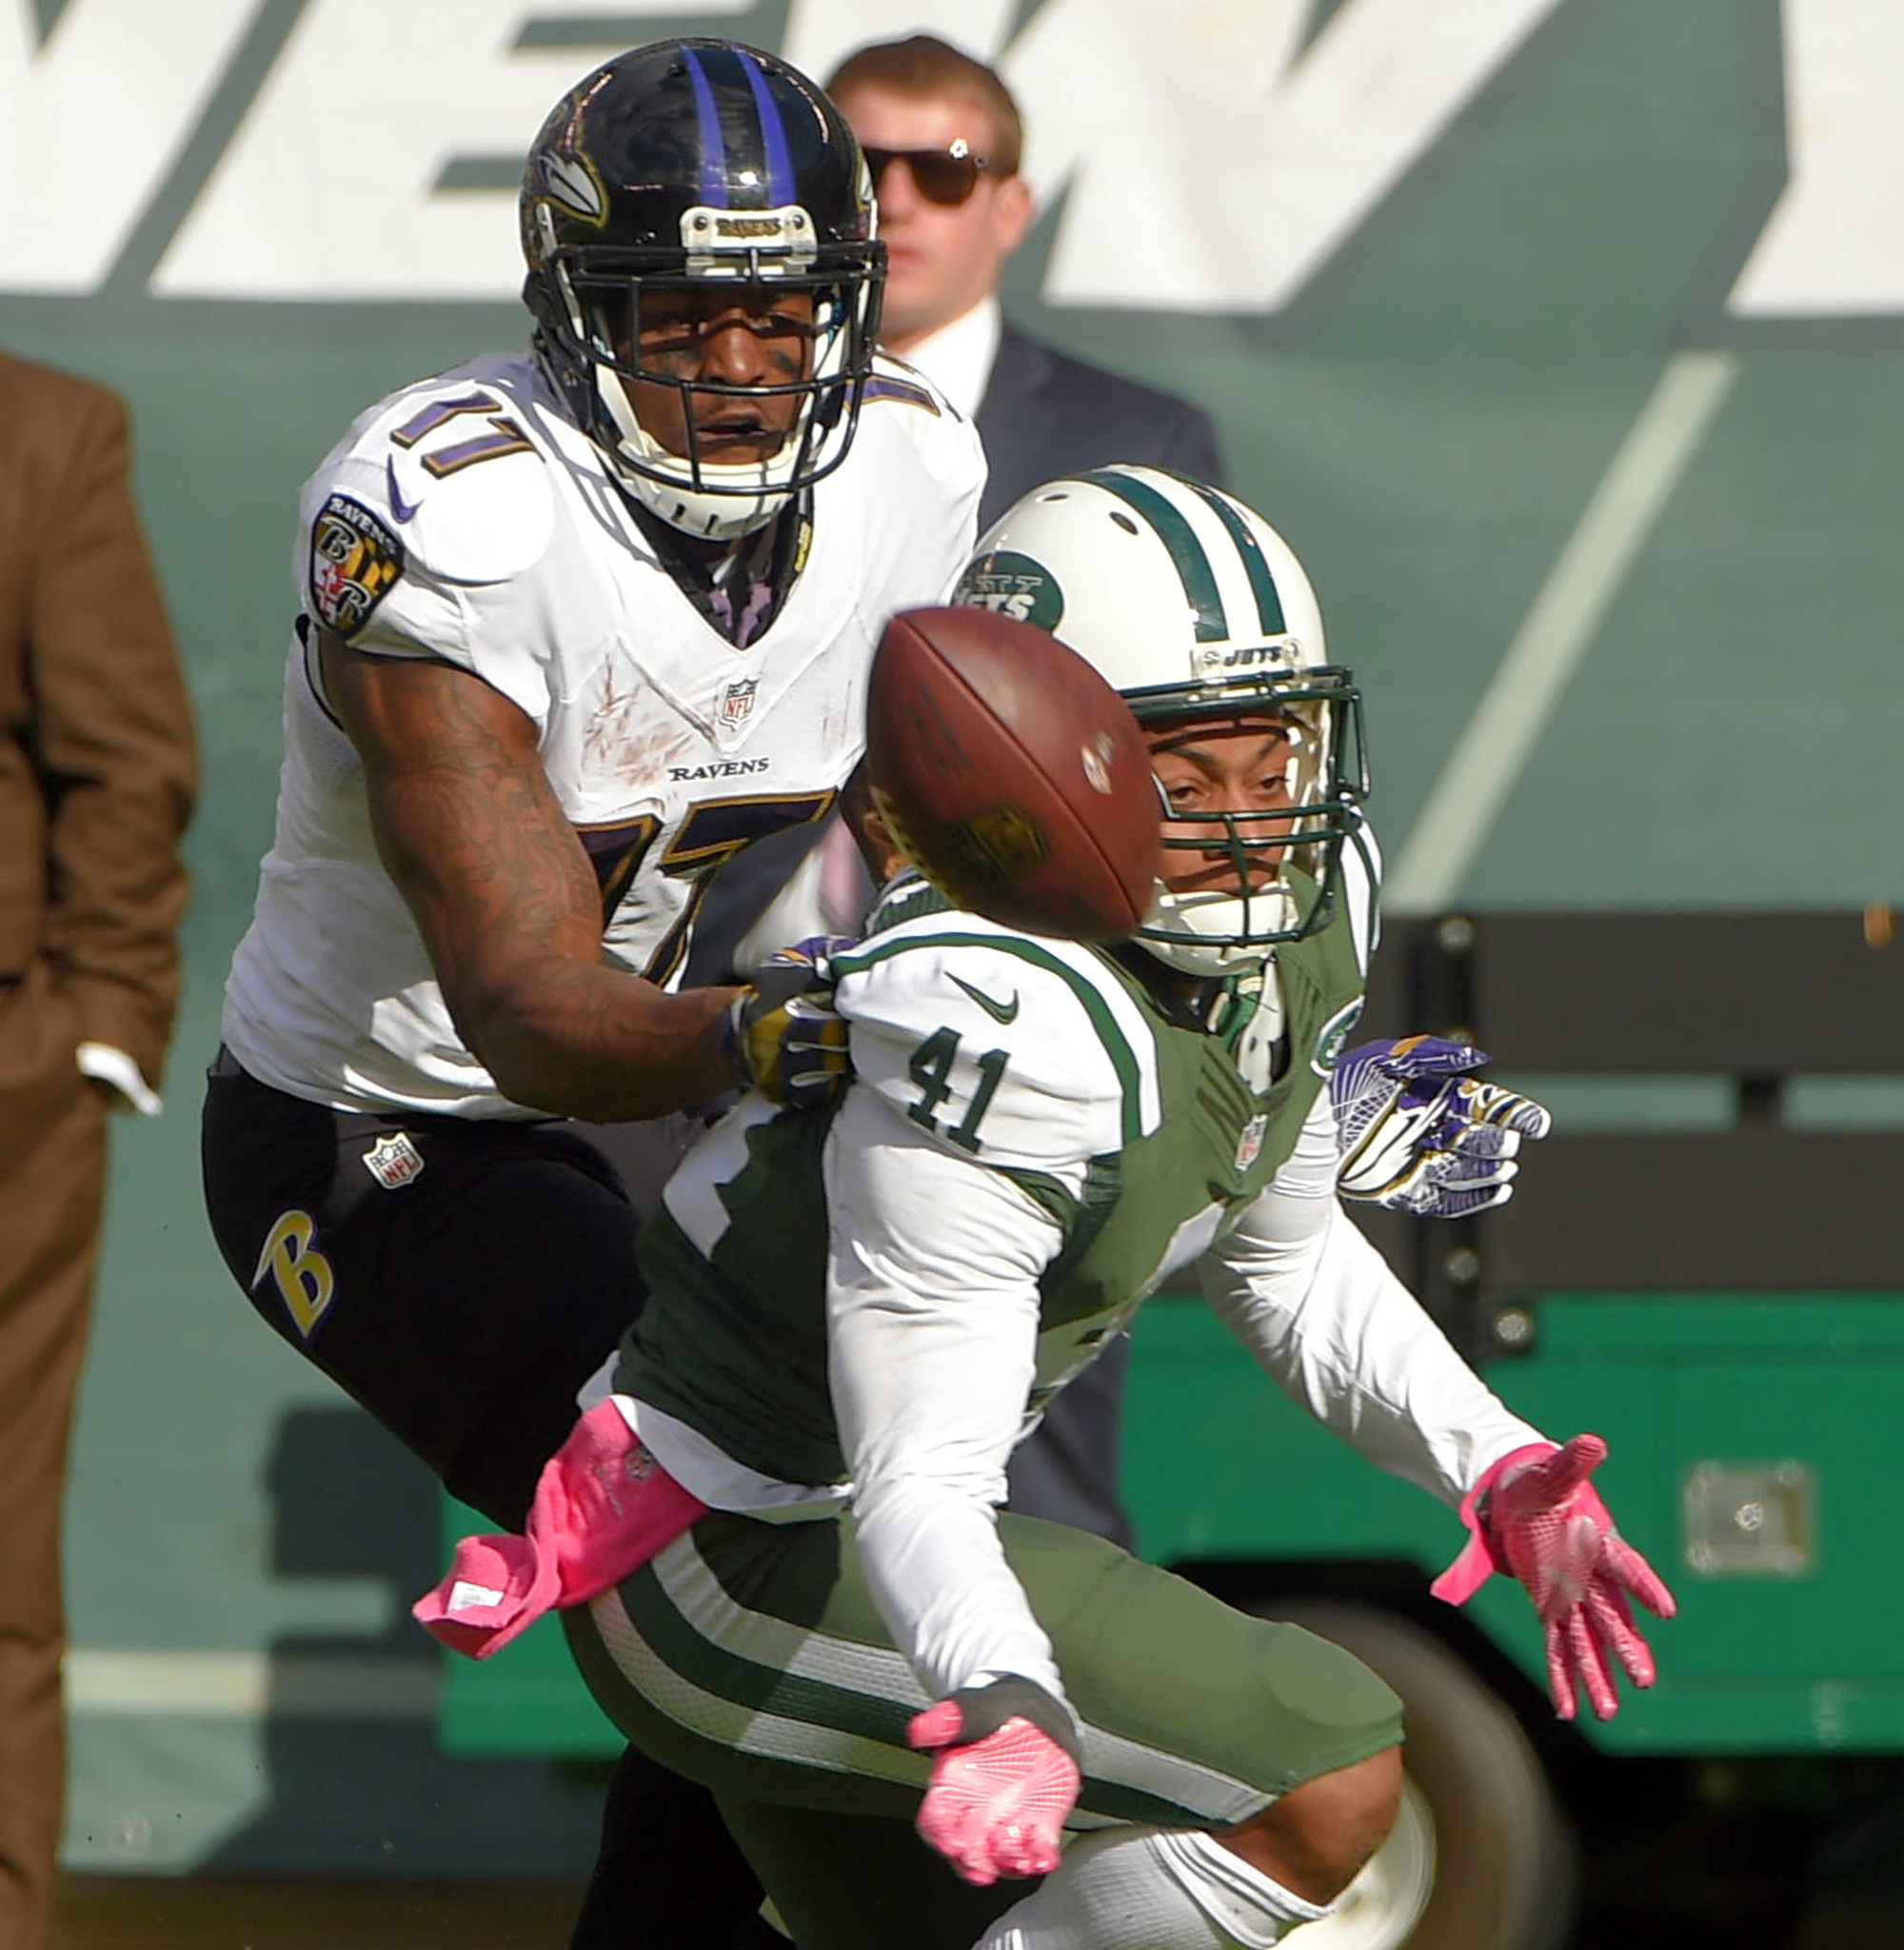 5 significant stats from the Ravens-Jets game